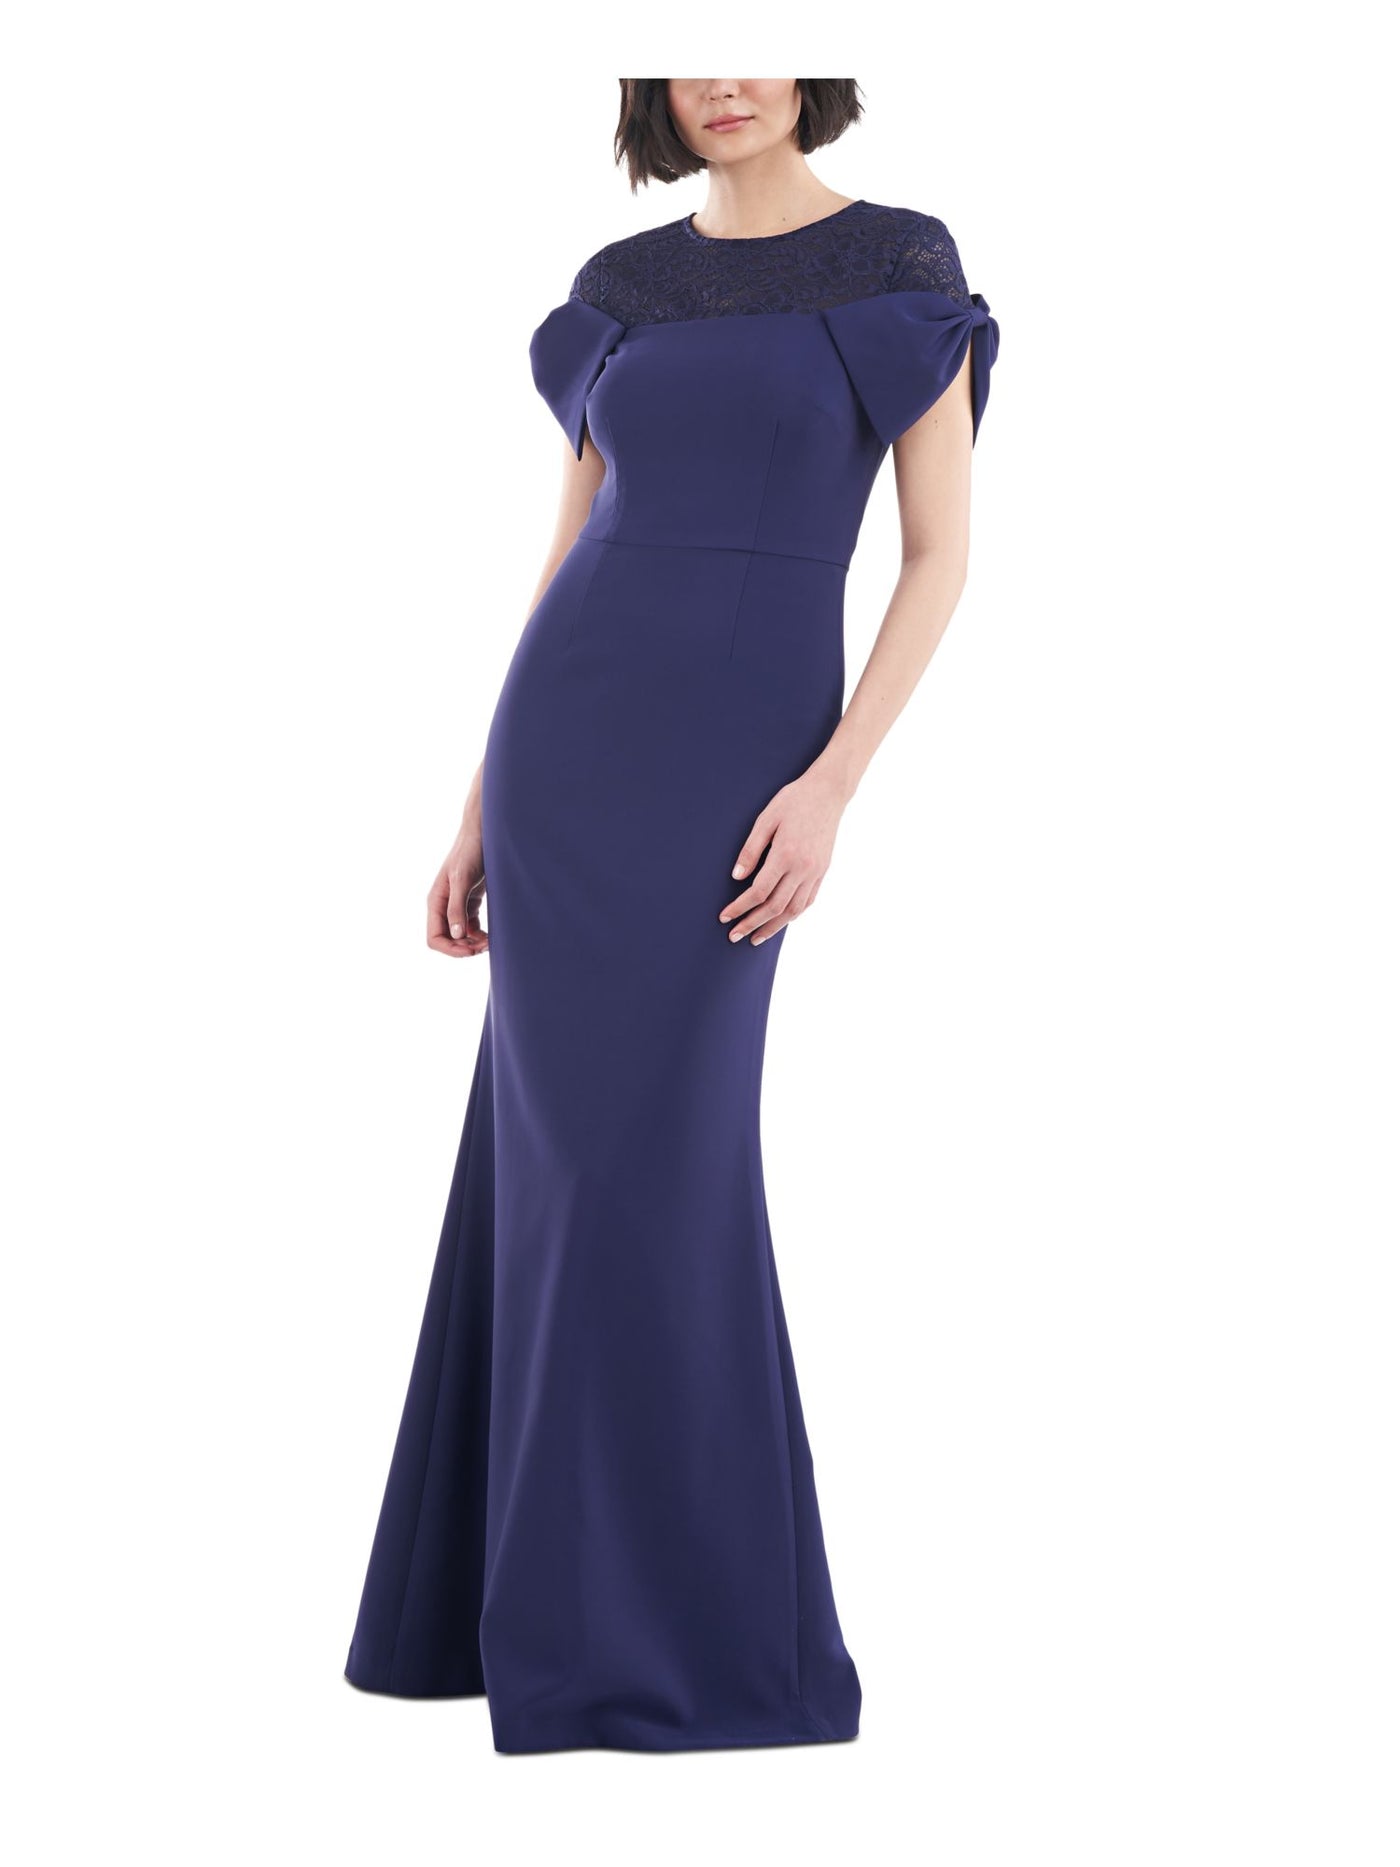 JS COLLECTIONS Womens Blue Zippered Slitted Bow Detail Cap Sleeves Crew Neck Full-Length Formal Gown Dress 16